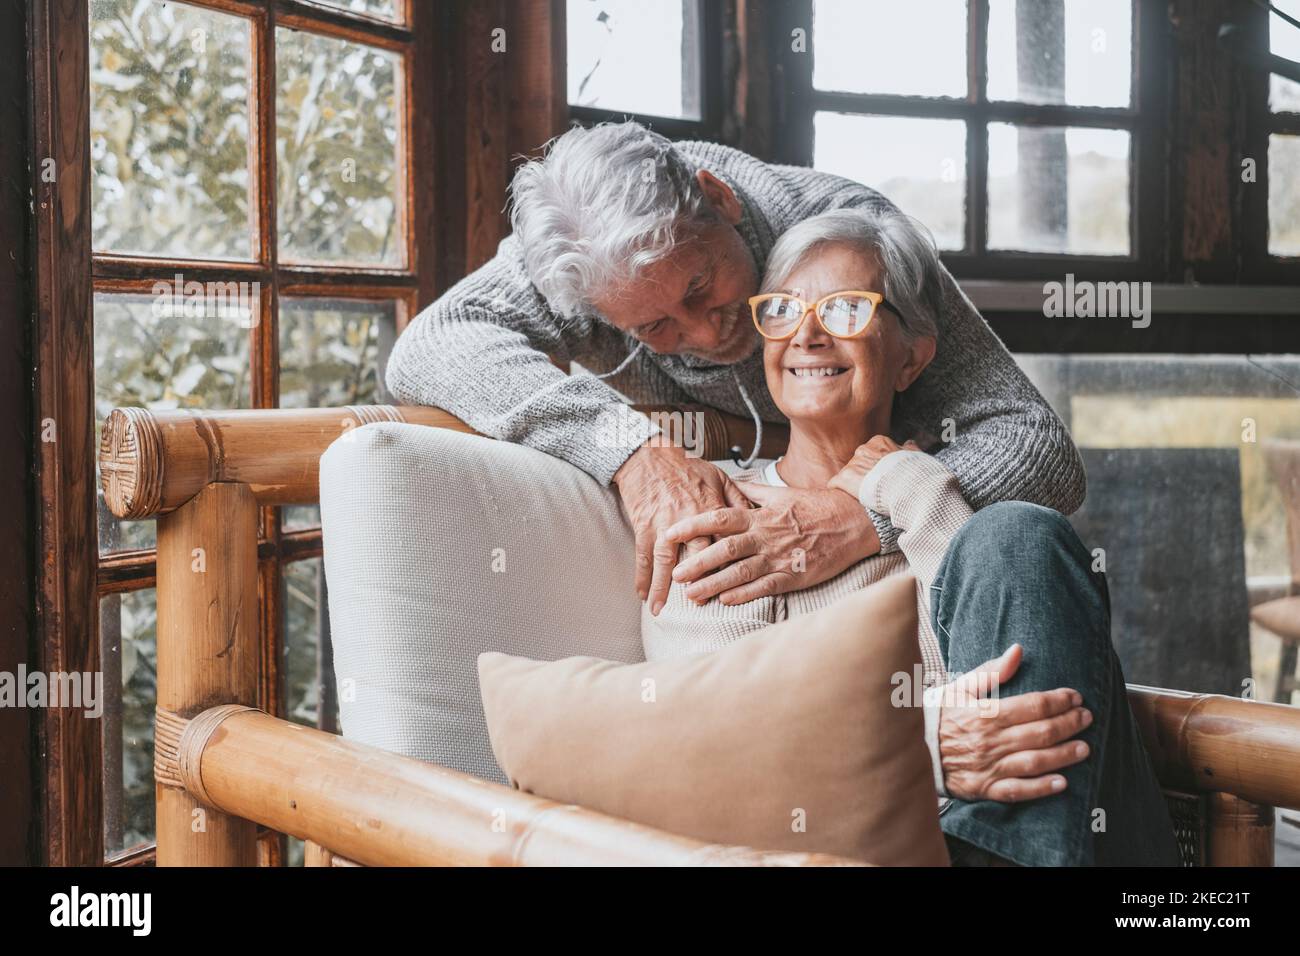 Old caucasian couple spending leisure time together at home. Loving husband embracing wife from behind sitting on armchair at house. Romantic aged man hugging his life partner relaxing on chair Stock Photo